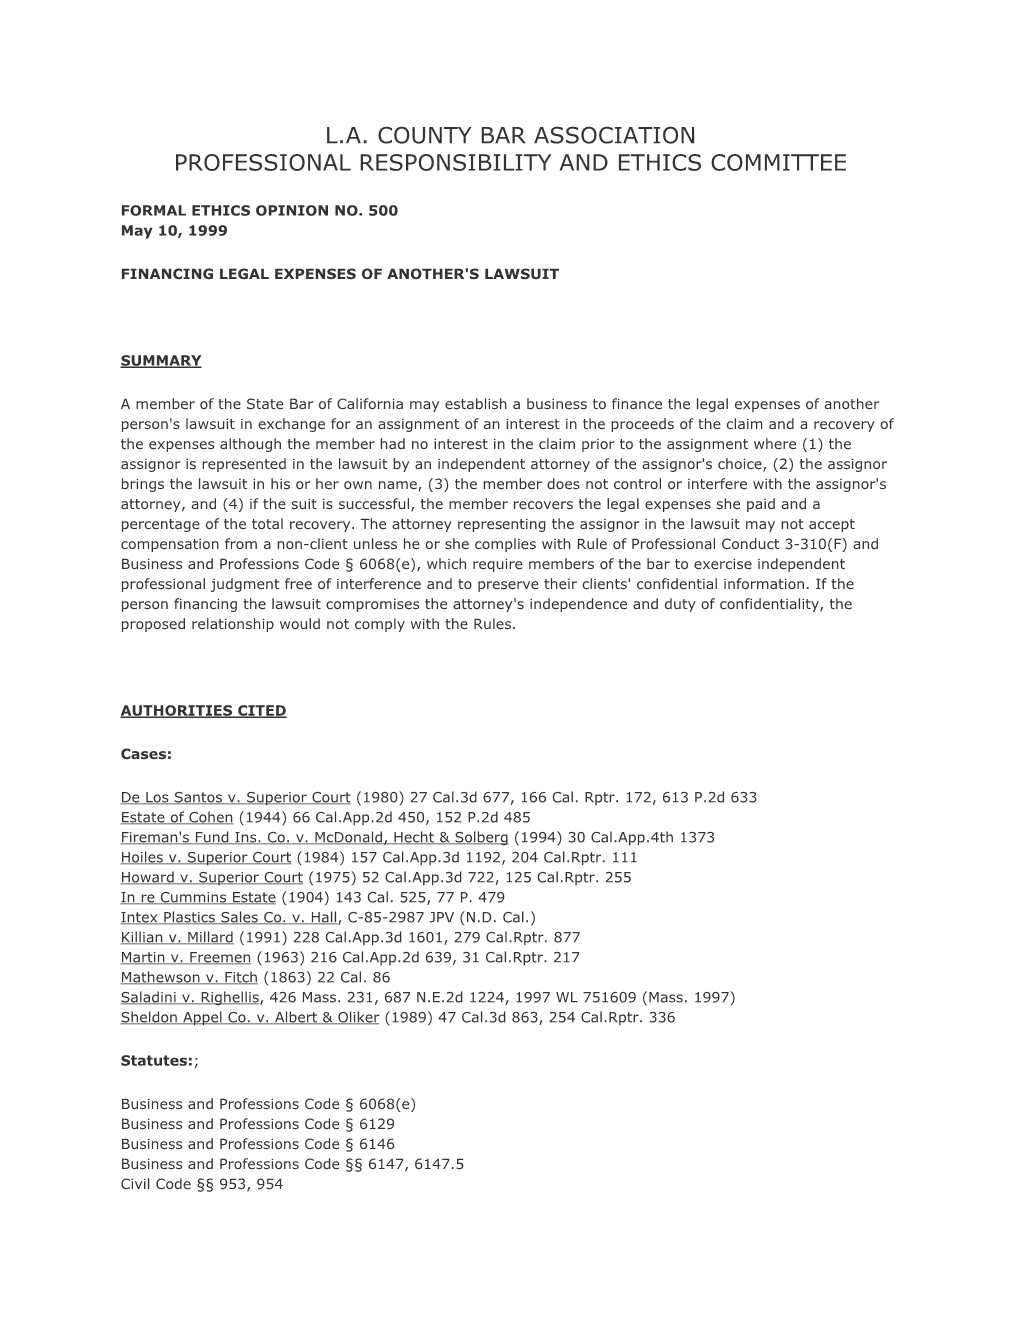 La County Bar Association Professional Responsibility and Ethics Committee